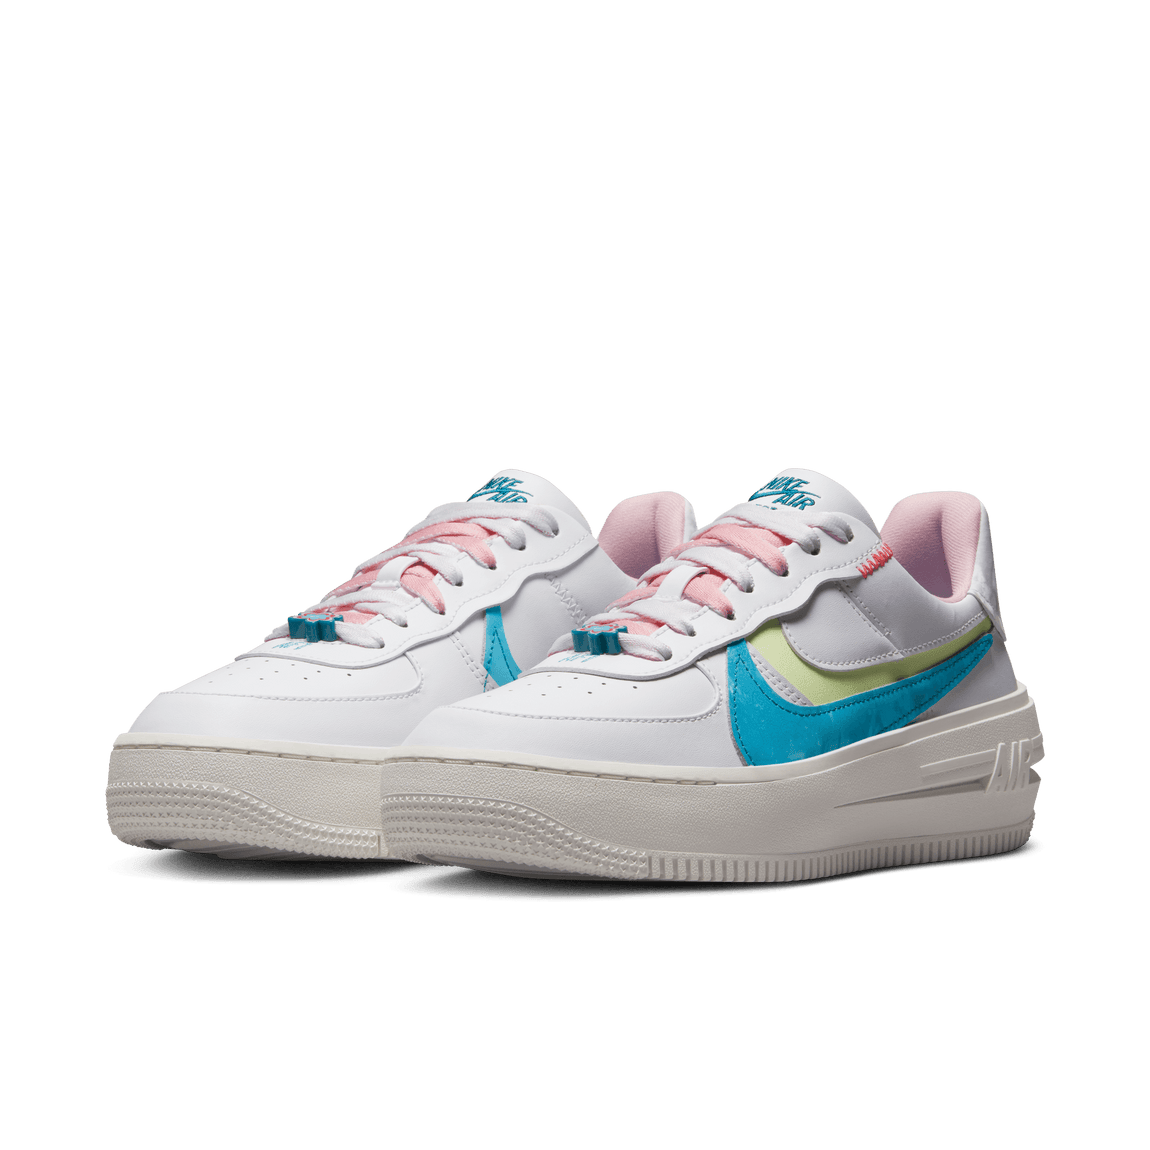 Nike Women's Air Force 1 PLT.AF.ORM (White/Baltic Blue-Medium Soft Pink) - Nike Women's Air Force 1 PLT.AF.ORM (White/Baltic Blue-Medium Soft Pink) - 